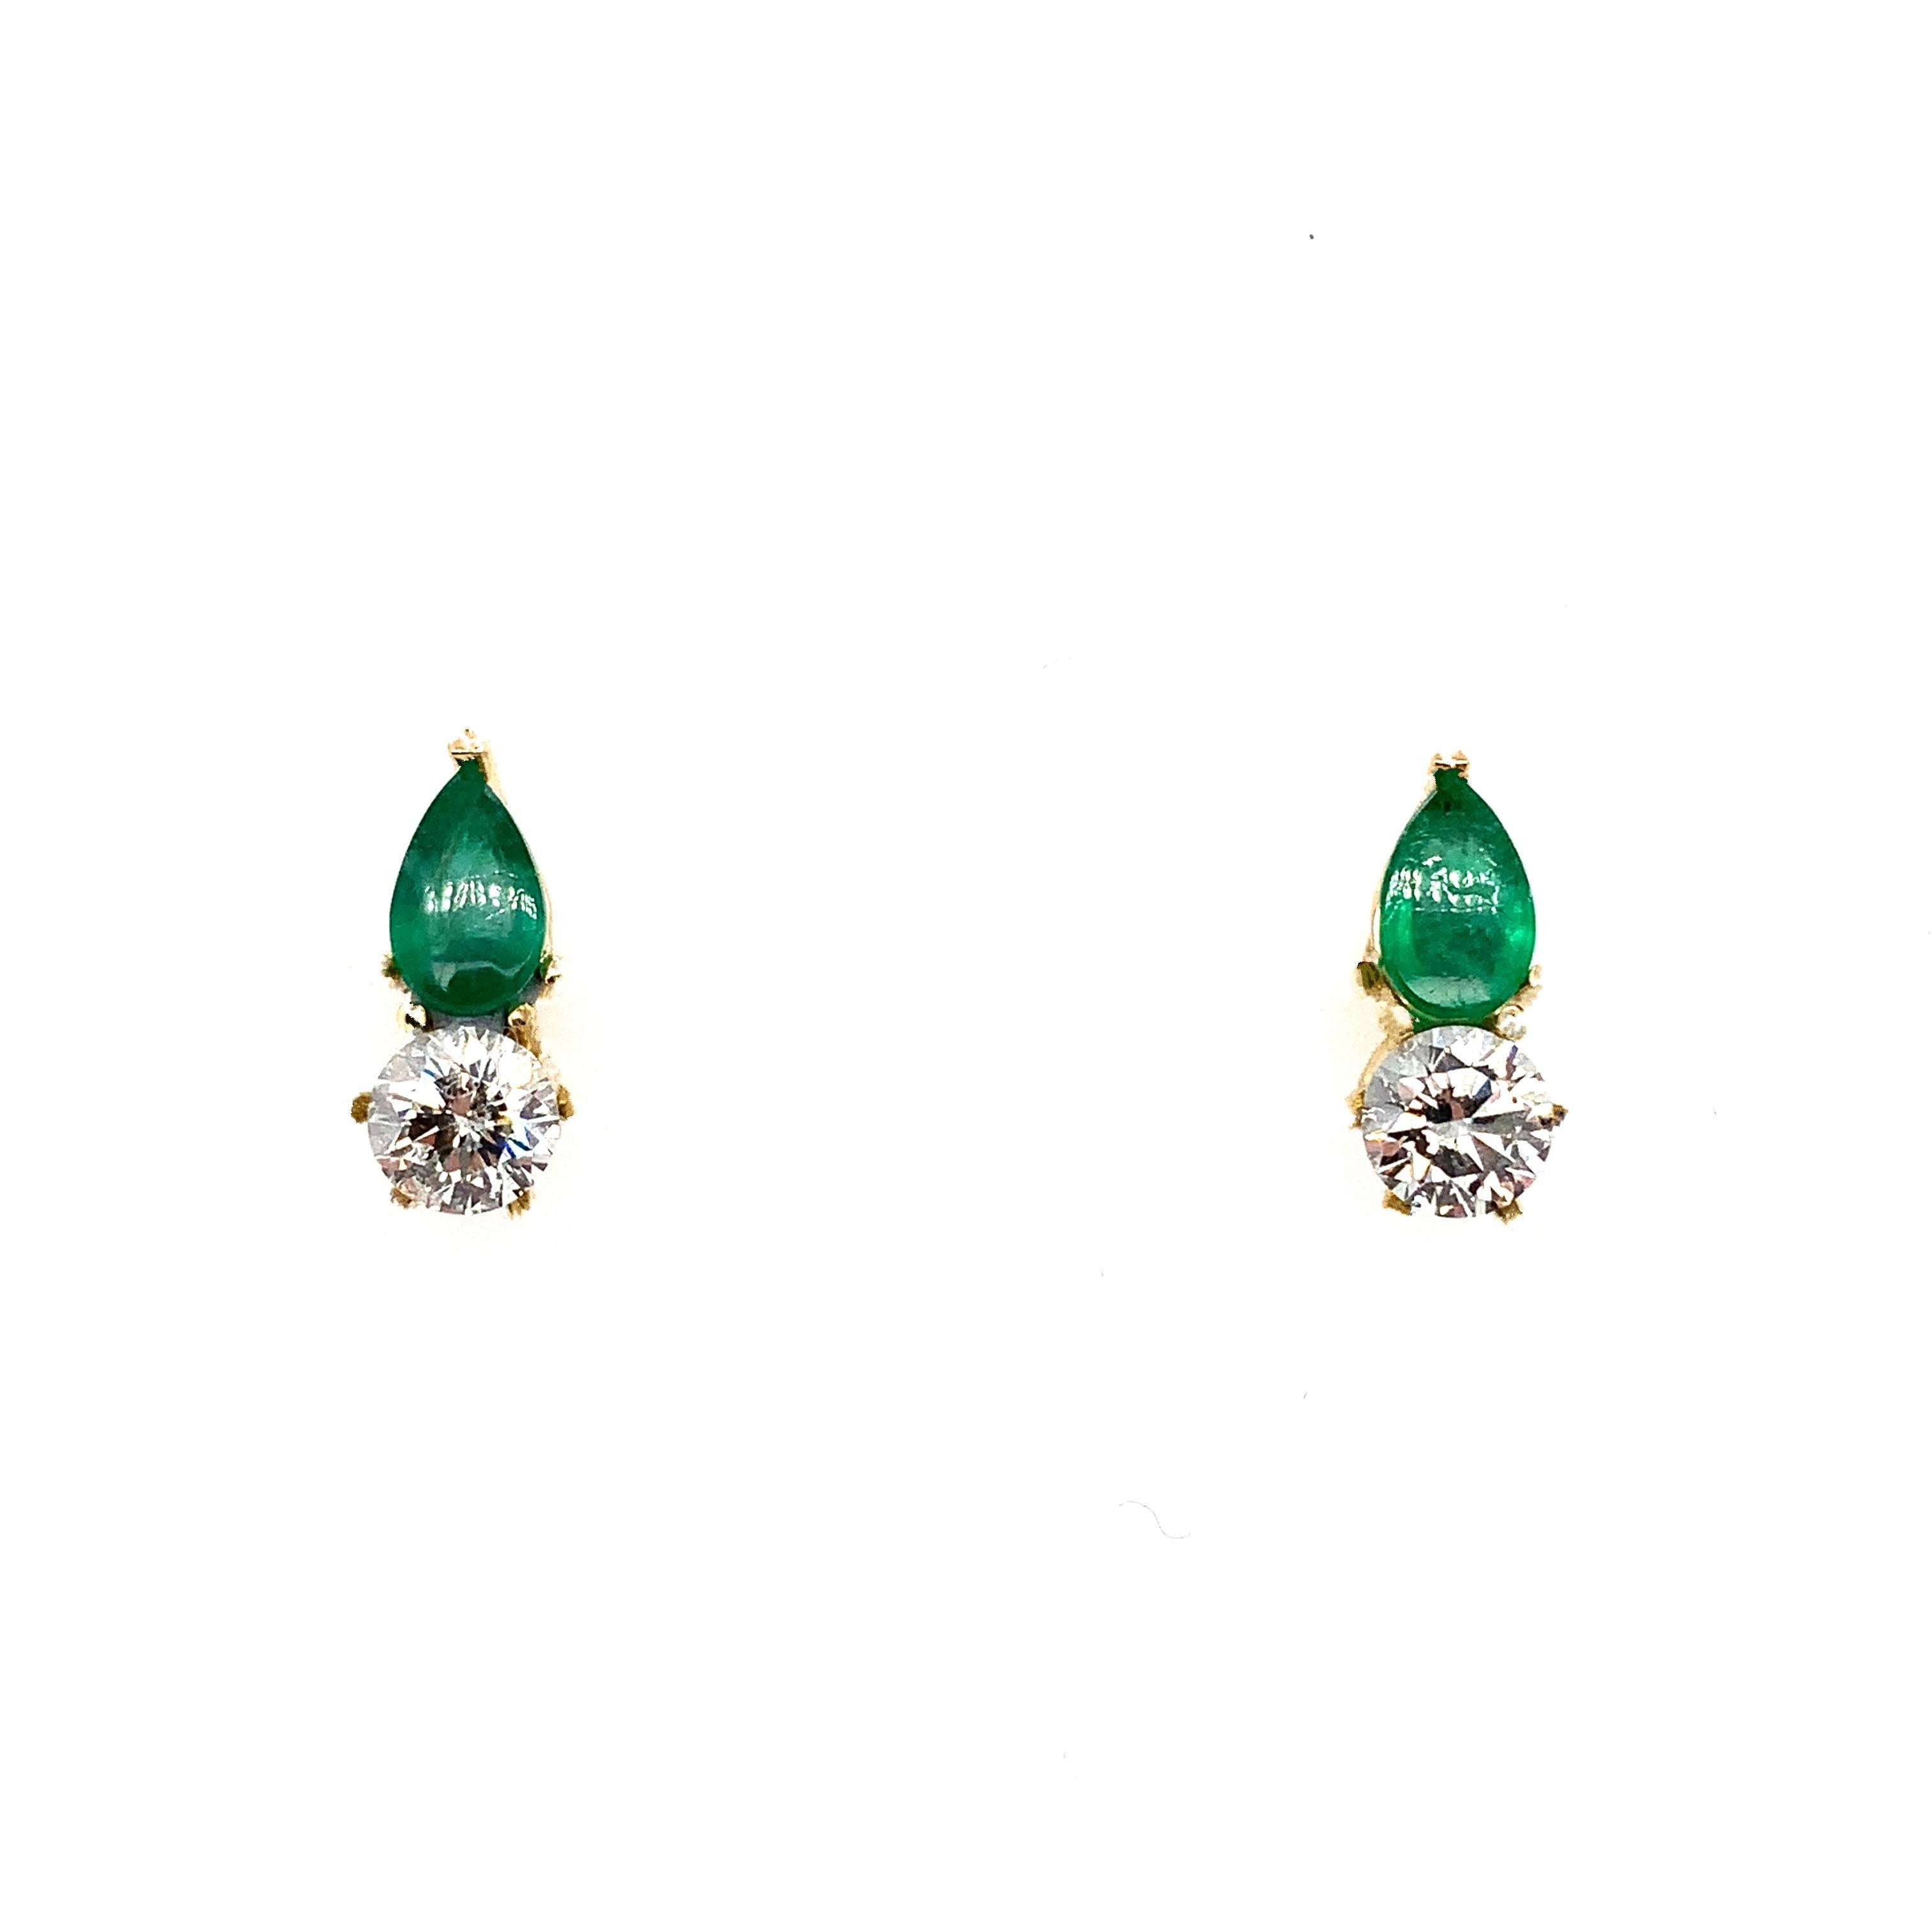 2.12ct Diamond and green emerald art deco stud earrings 18k yellow gold.
Beautiful art deco style stud earrings composed of green emerald and round diamonds in 18k yellow gold.
Colombian green emerald pear shaped cabochon, natural untreated gemstone